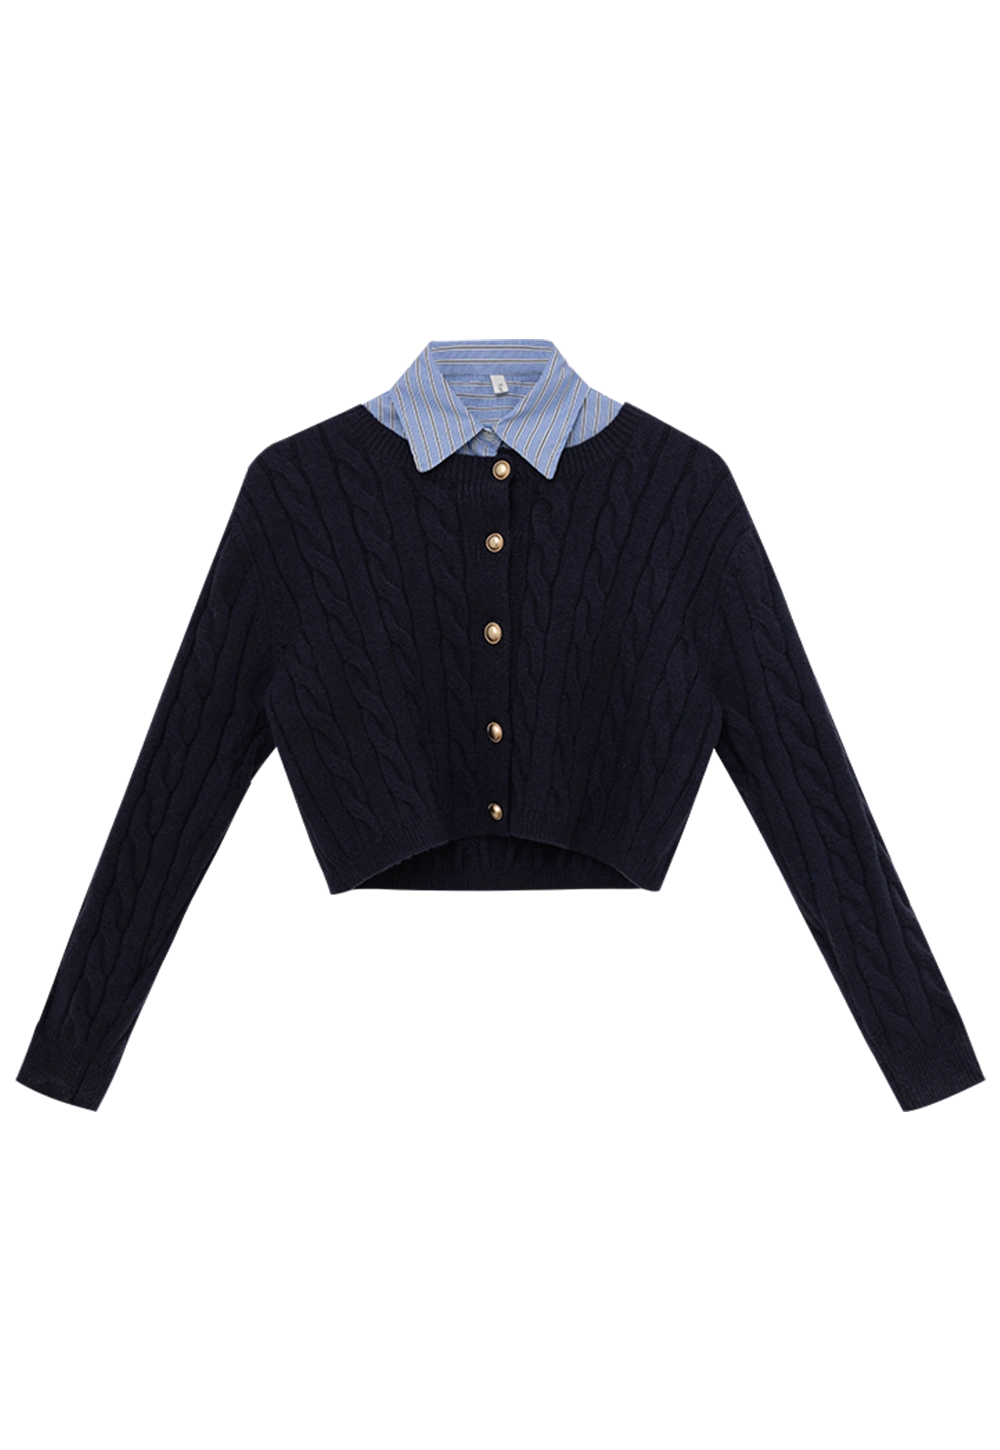 Navy Blue Cable Knit Cardigan with Contrasting Striped Collar - Preppy and Polished